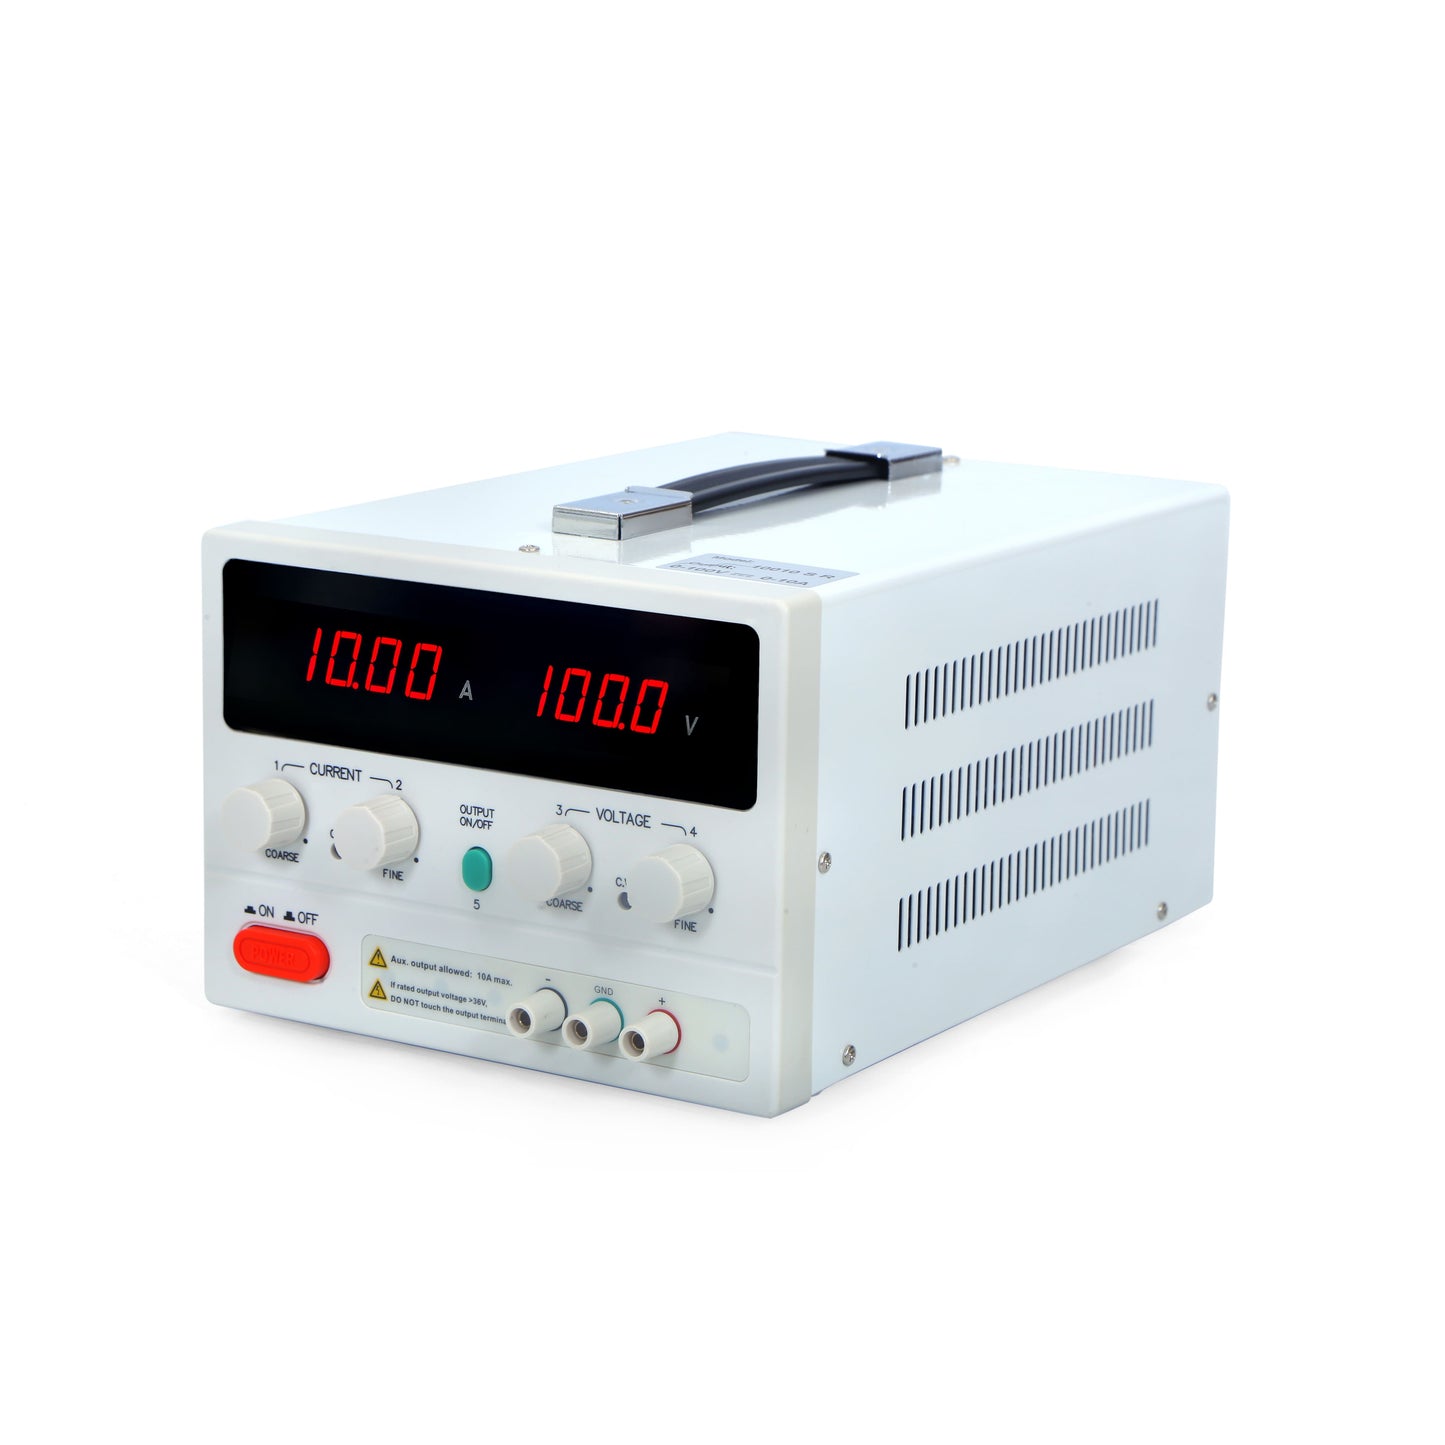 10010 SR 100V 10A SMPS Based DC Regulated Power supply with PC Interface